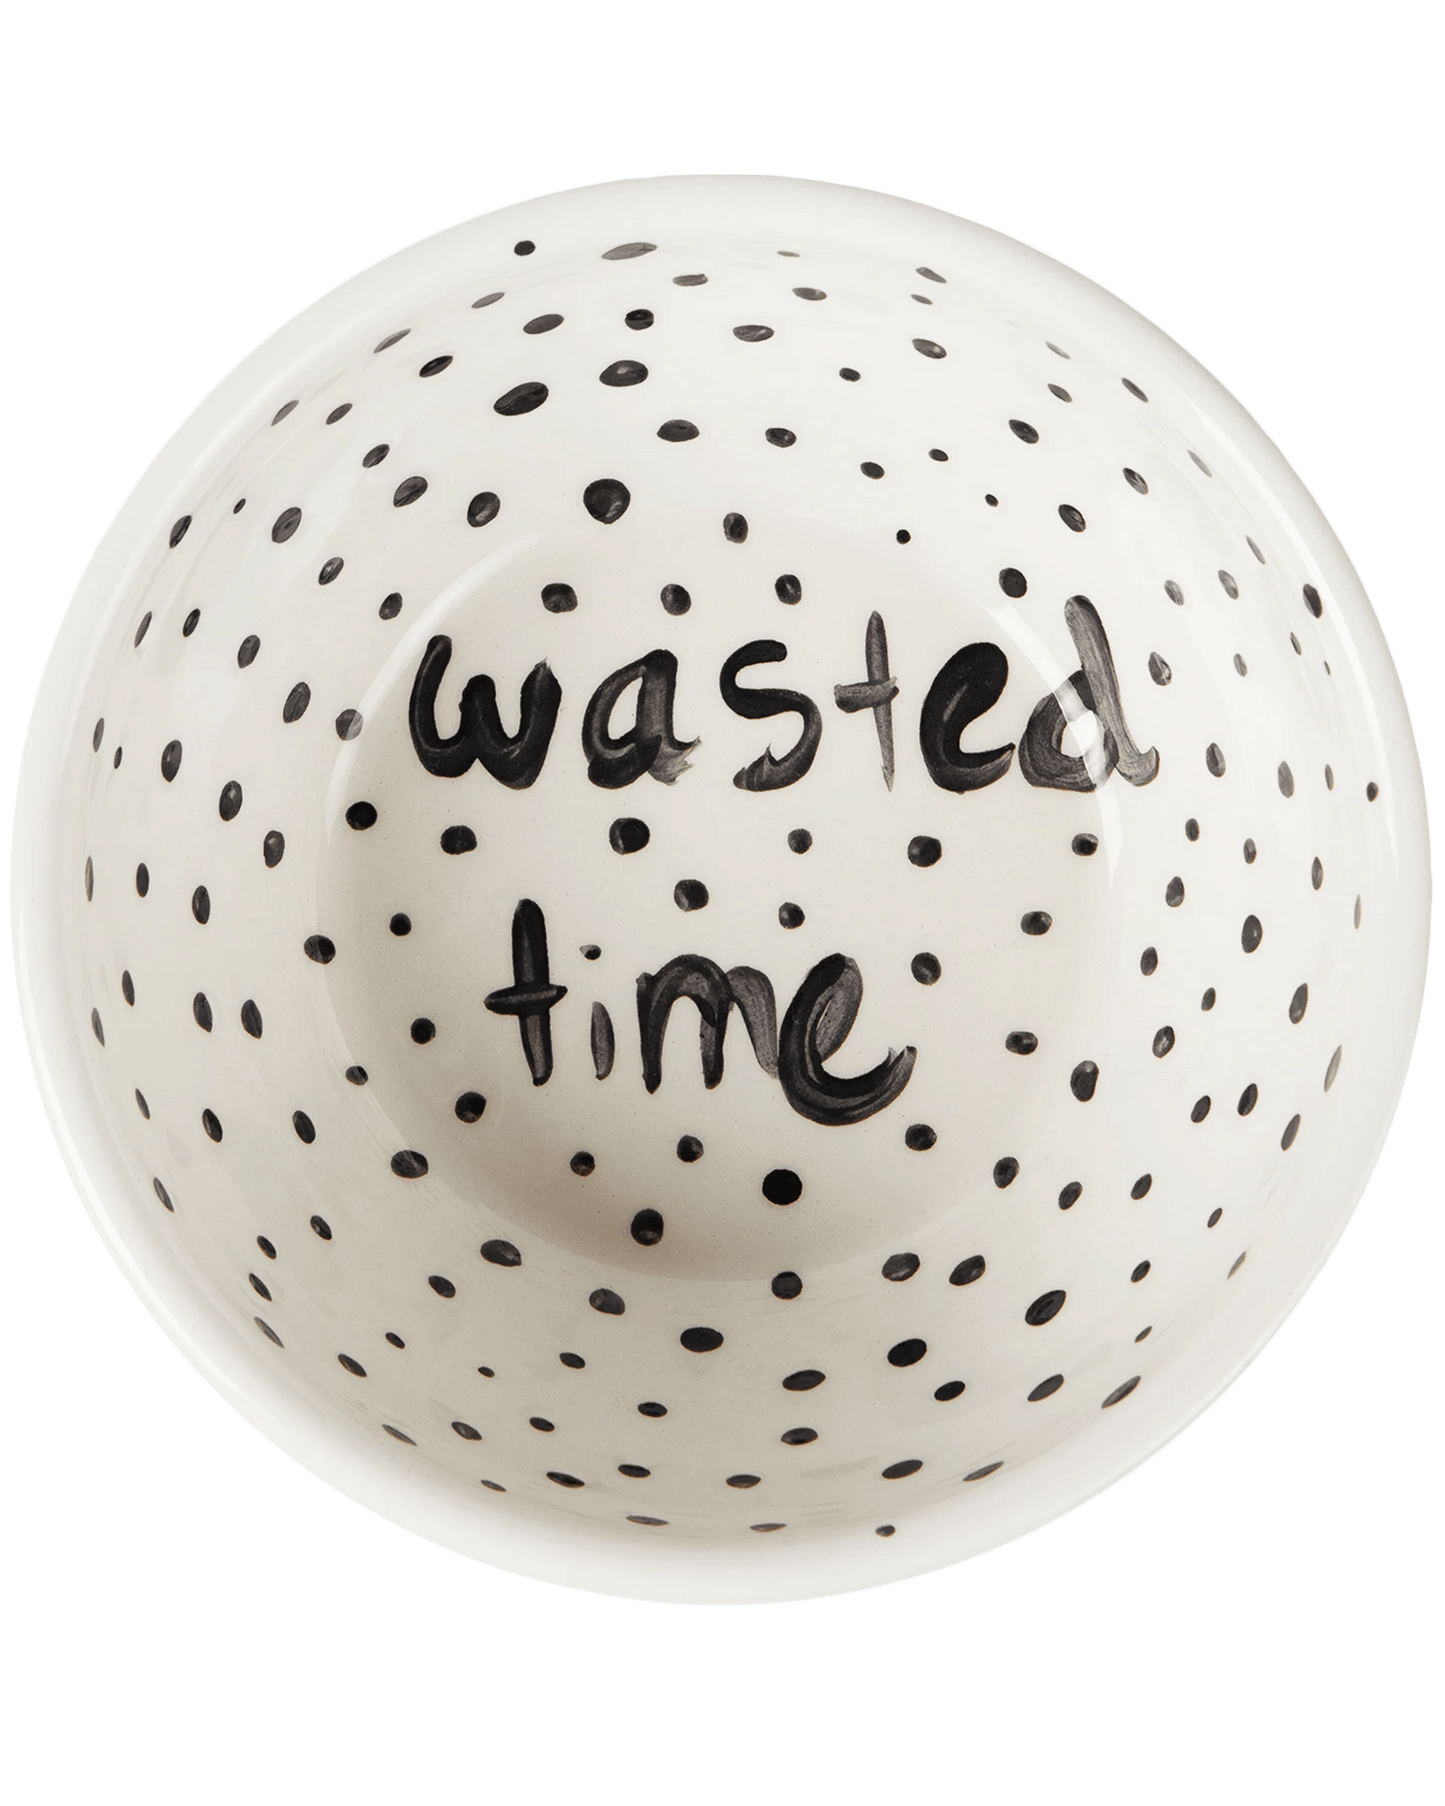 "Wasted Time" Poetry Hand Painted Bowl 6/12